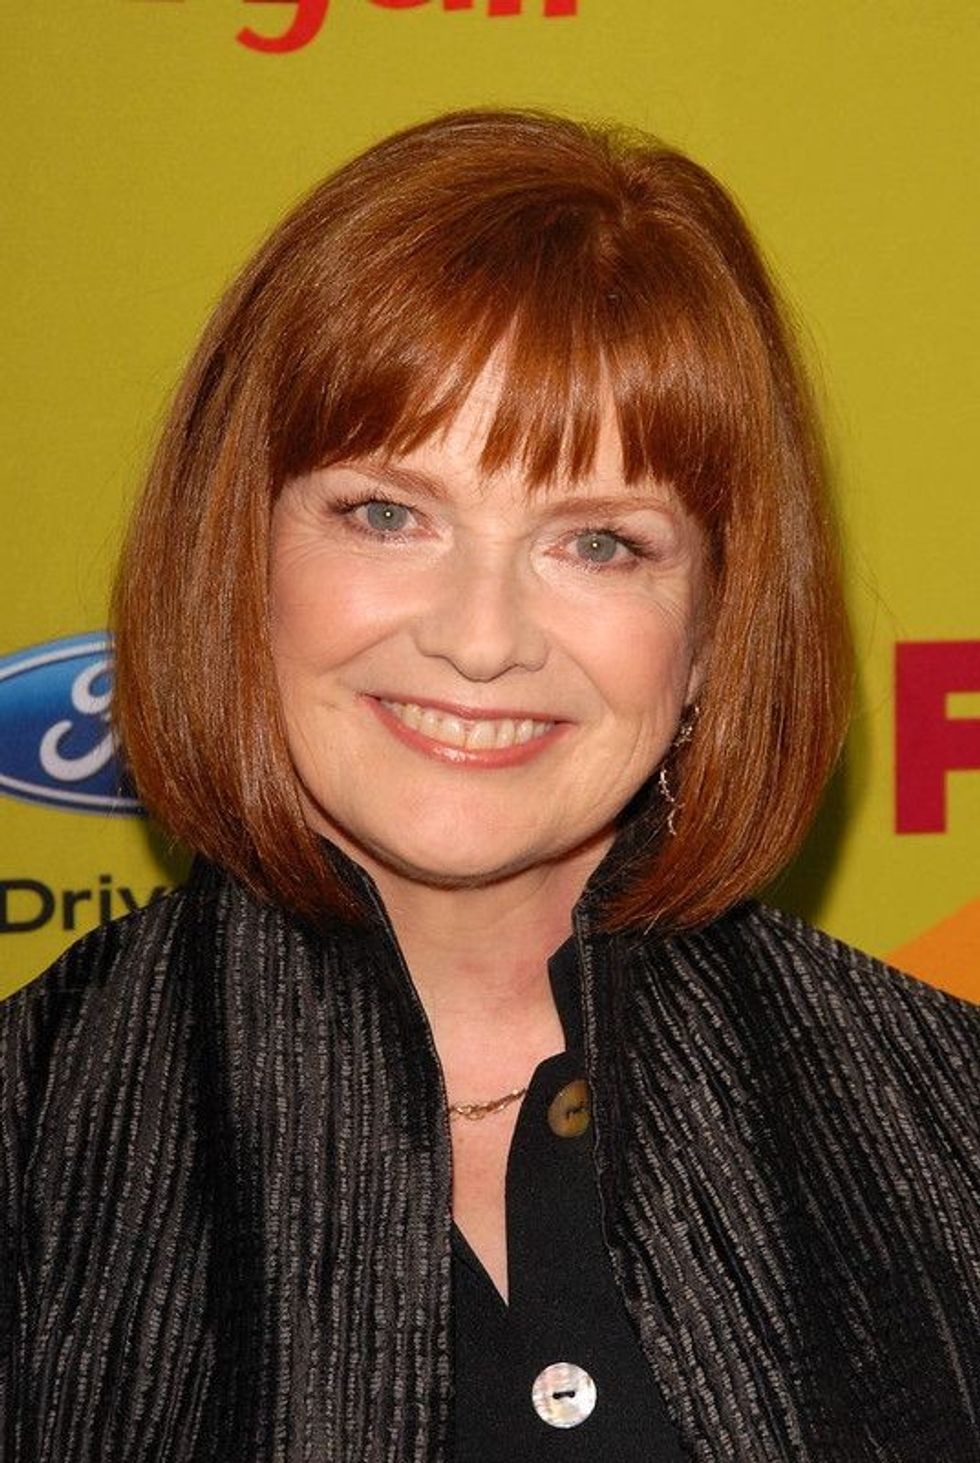 Discover more about Blair Brown, here.